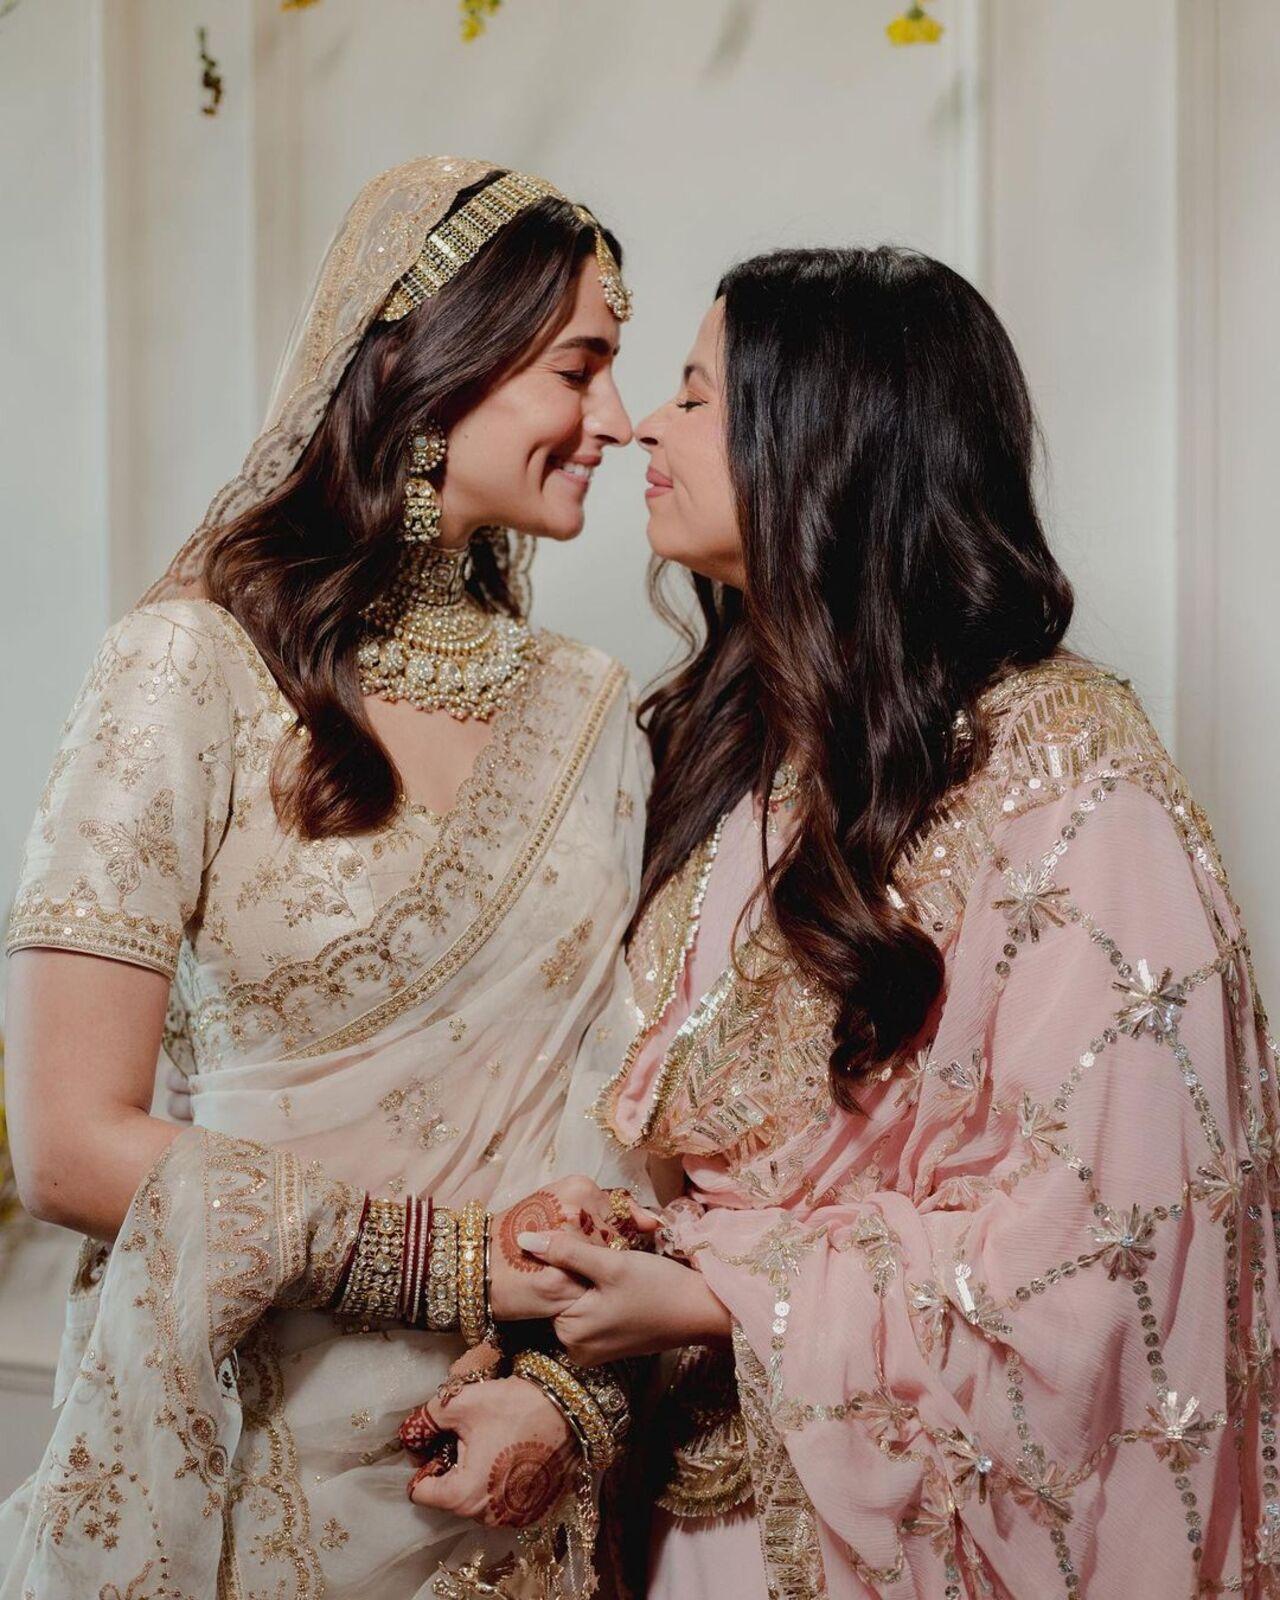 Alia Bhatt and her elder sister Shaheen Bhatt painted a cute picture at the former's intimate wedding in April 2022